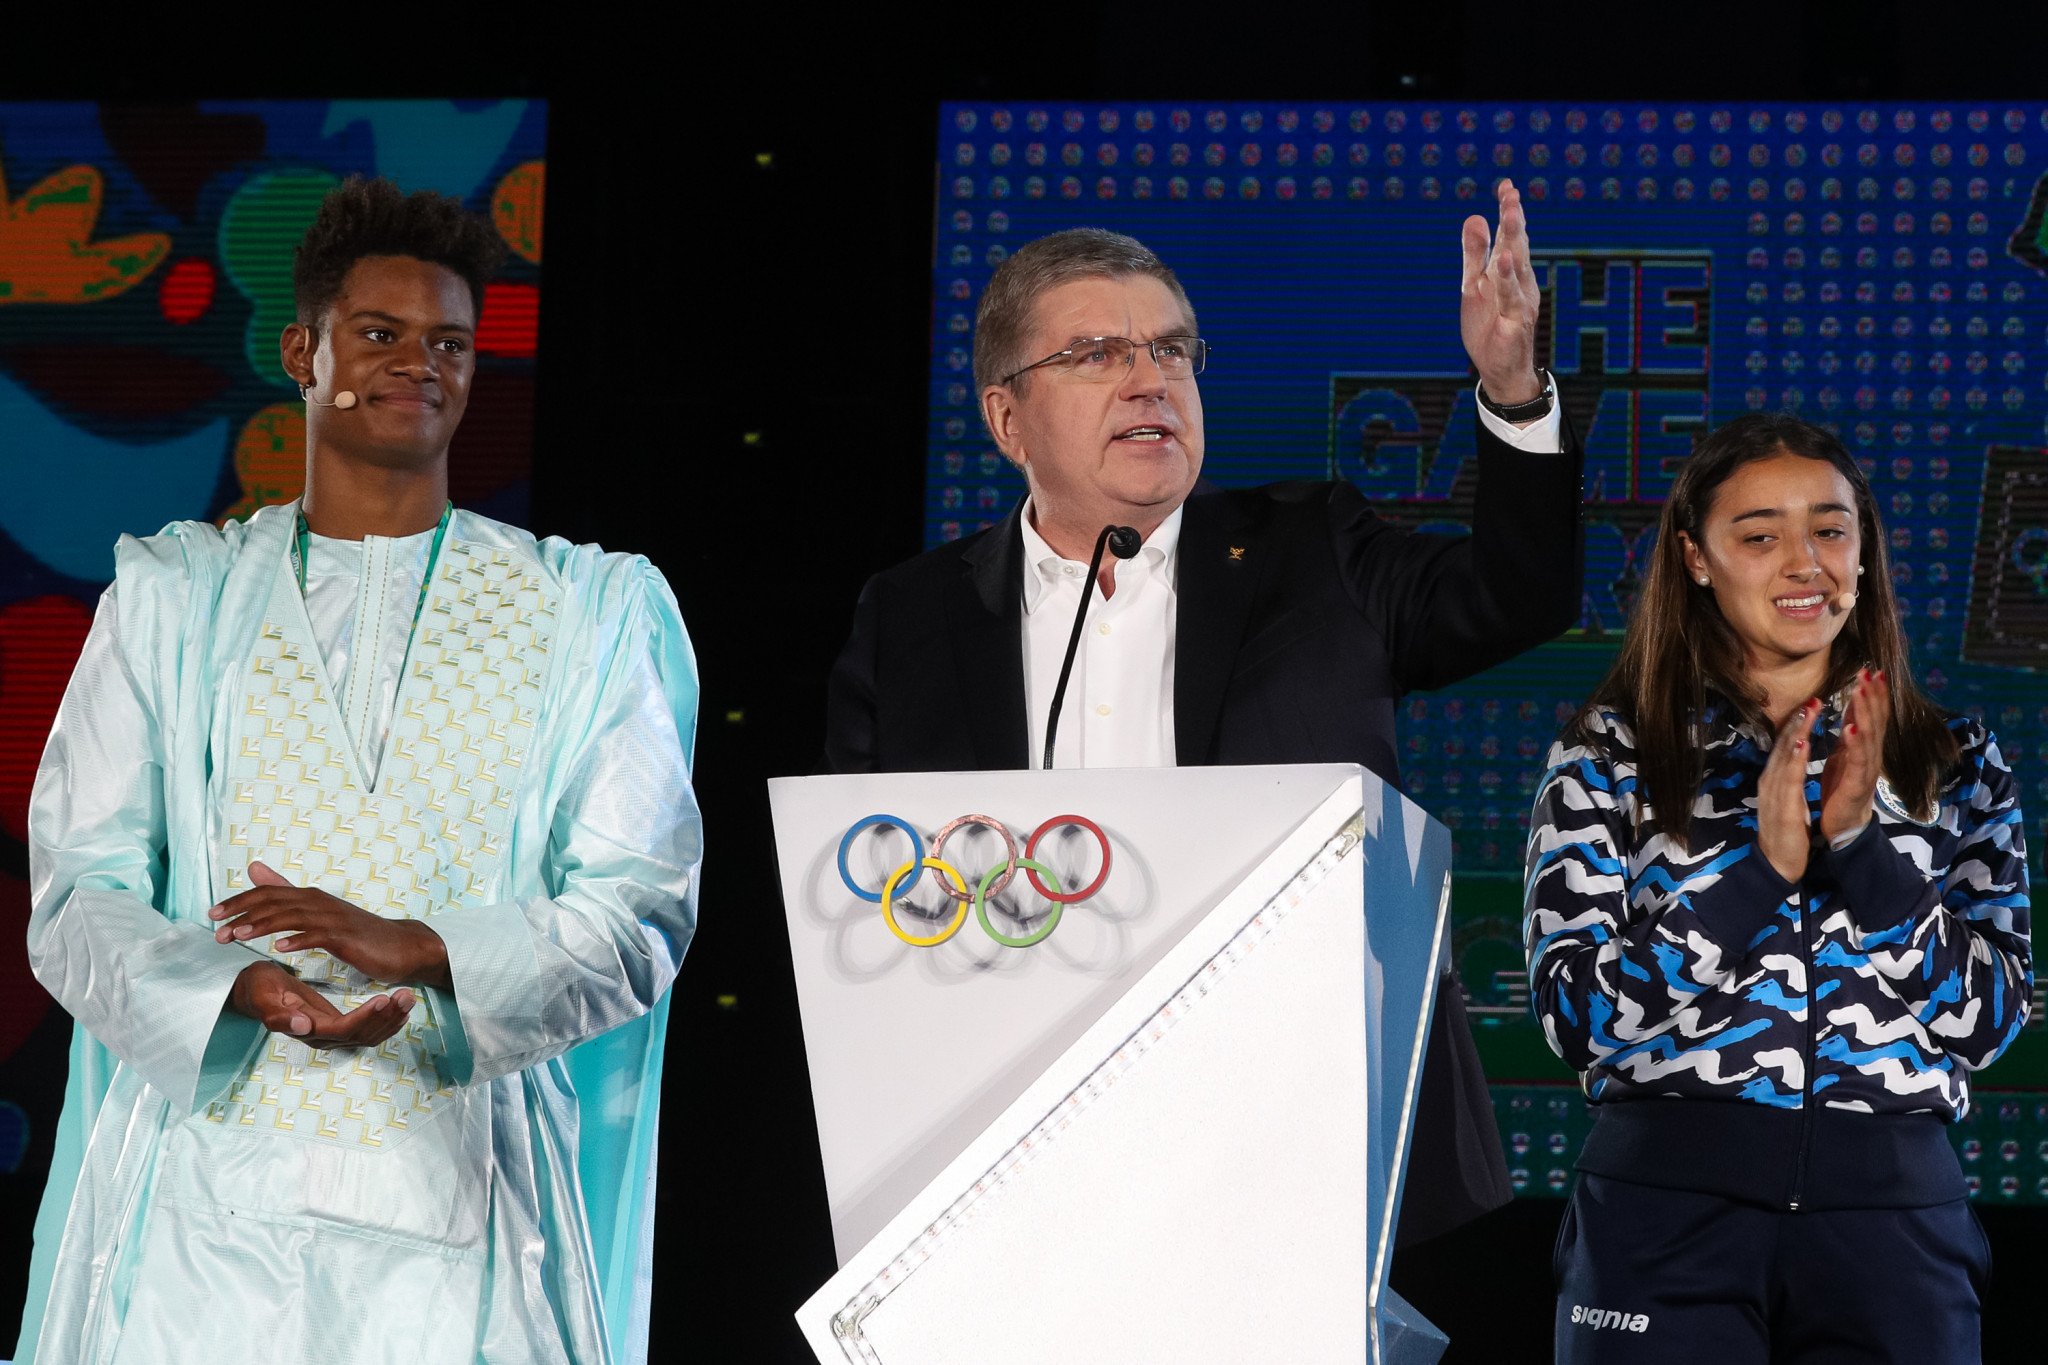 IOC President Thomas Bach thanked Argentina and Buenos Aires during his speech at the ceremony ©Getty Images